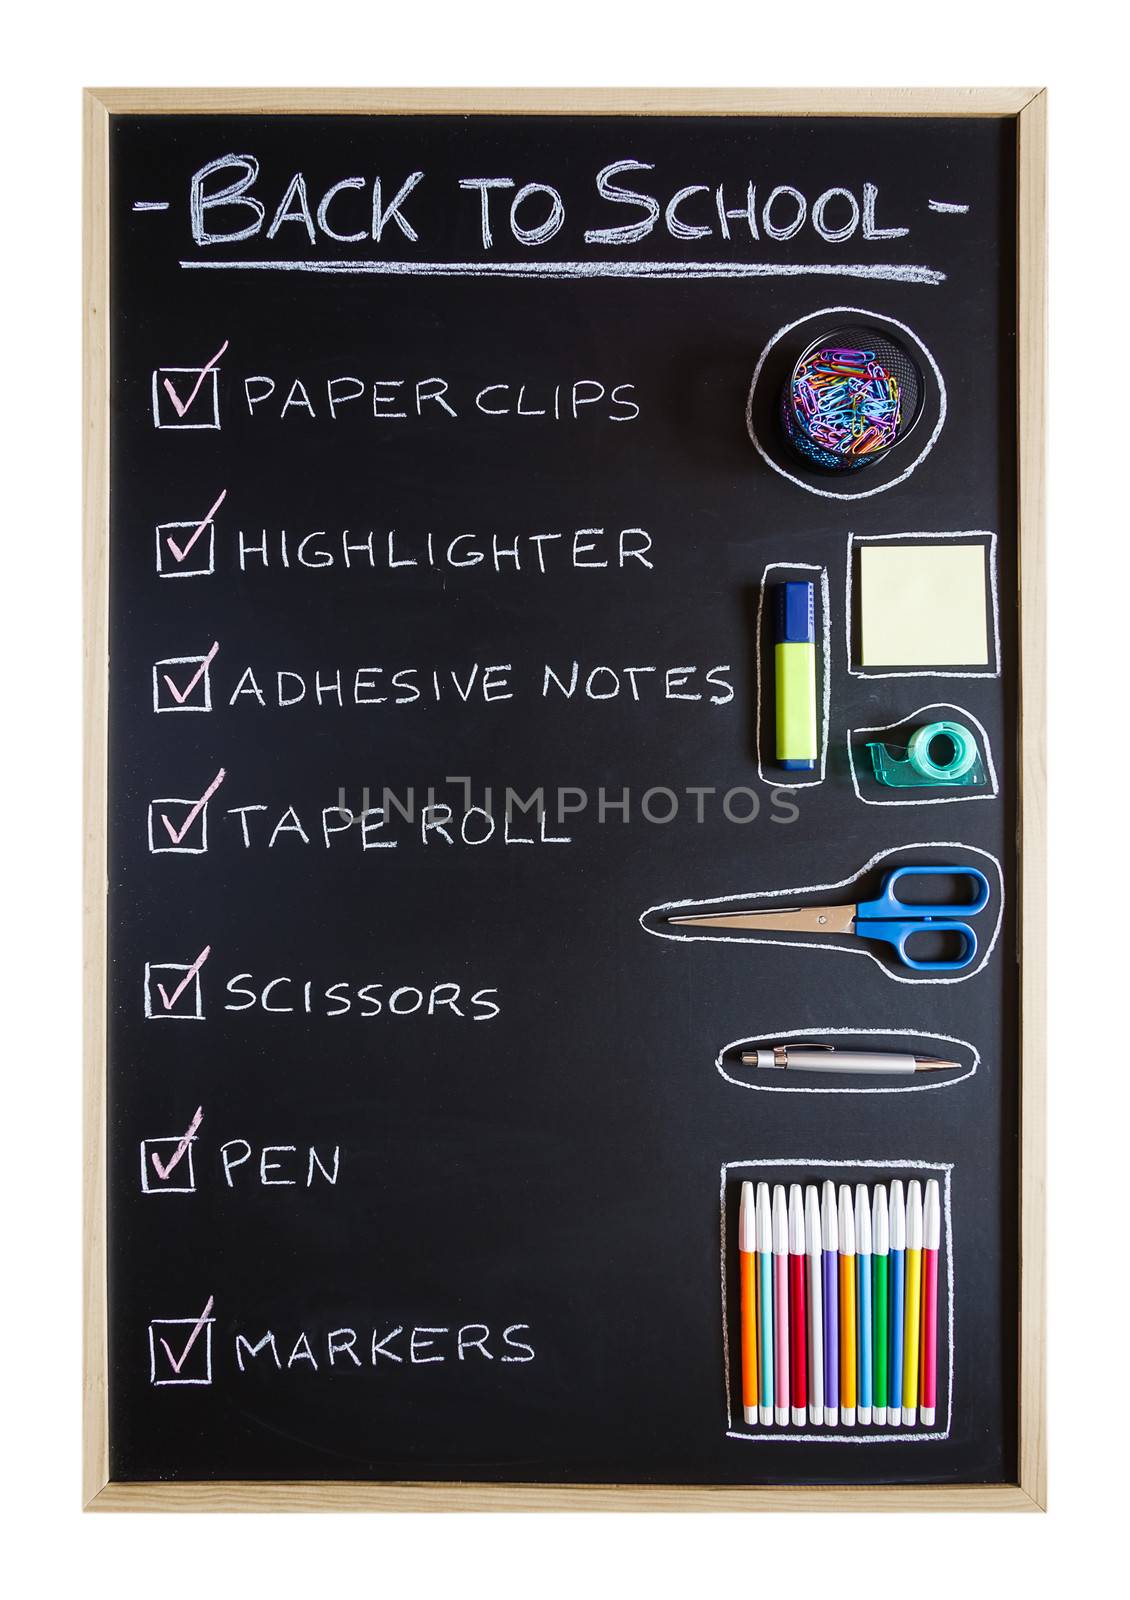 School supplies over blackboard background by doble.d